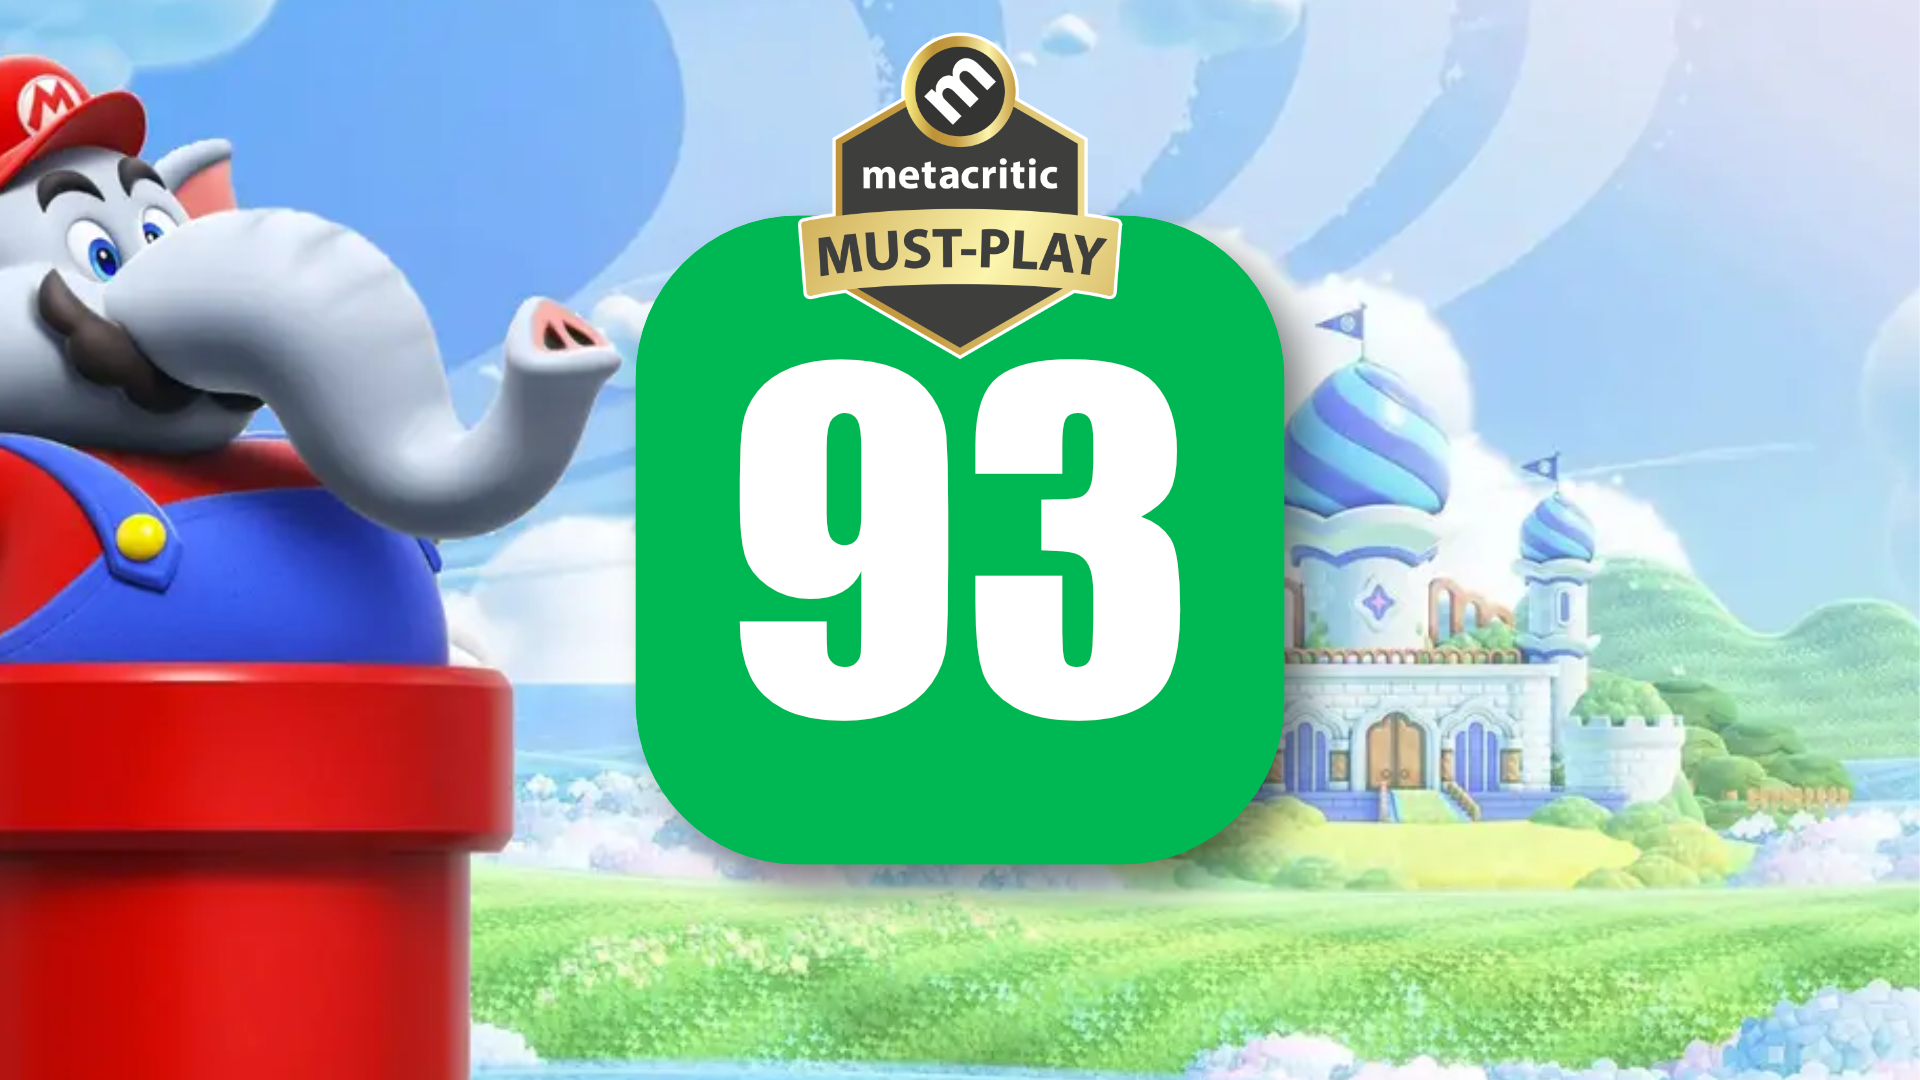 The best Mario games on Nintendo Switch, according to Metacritic